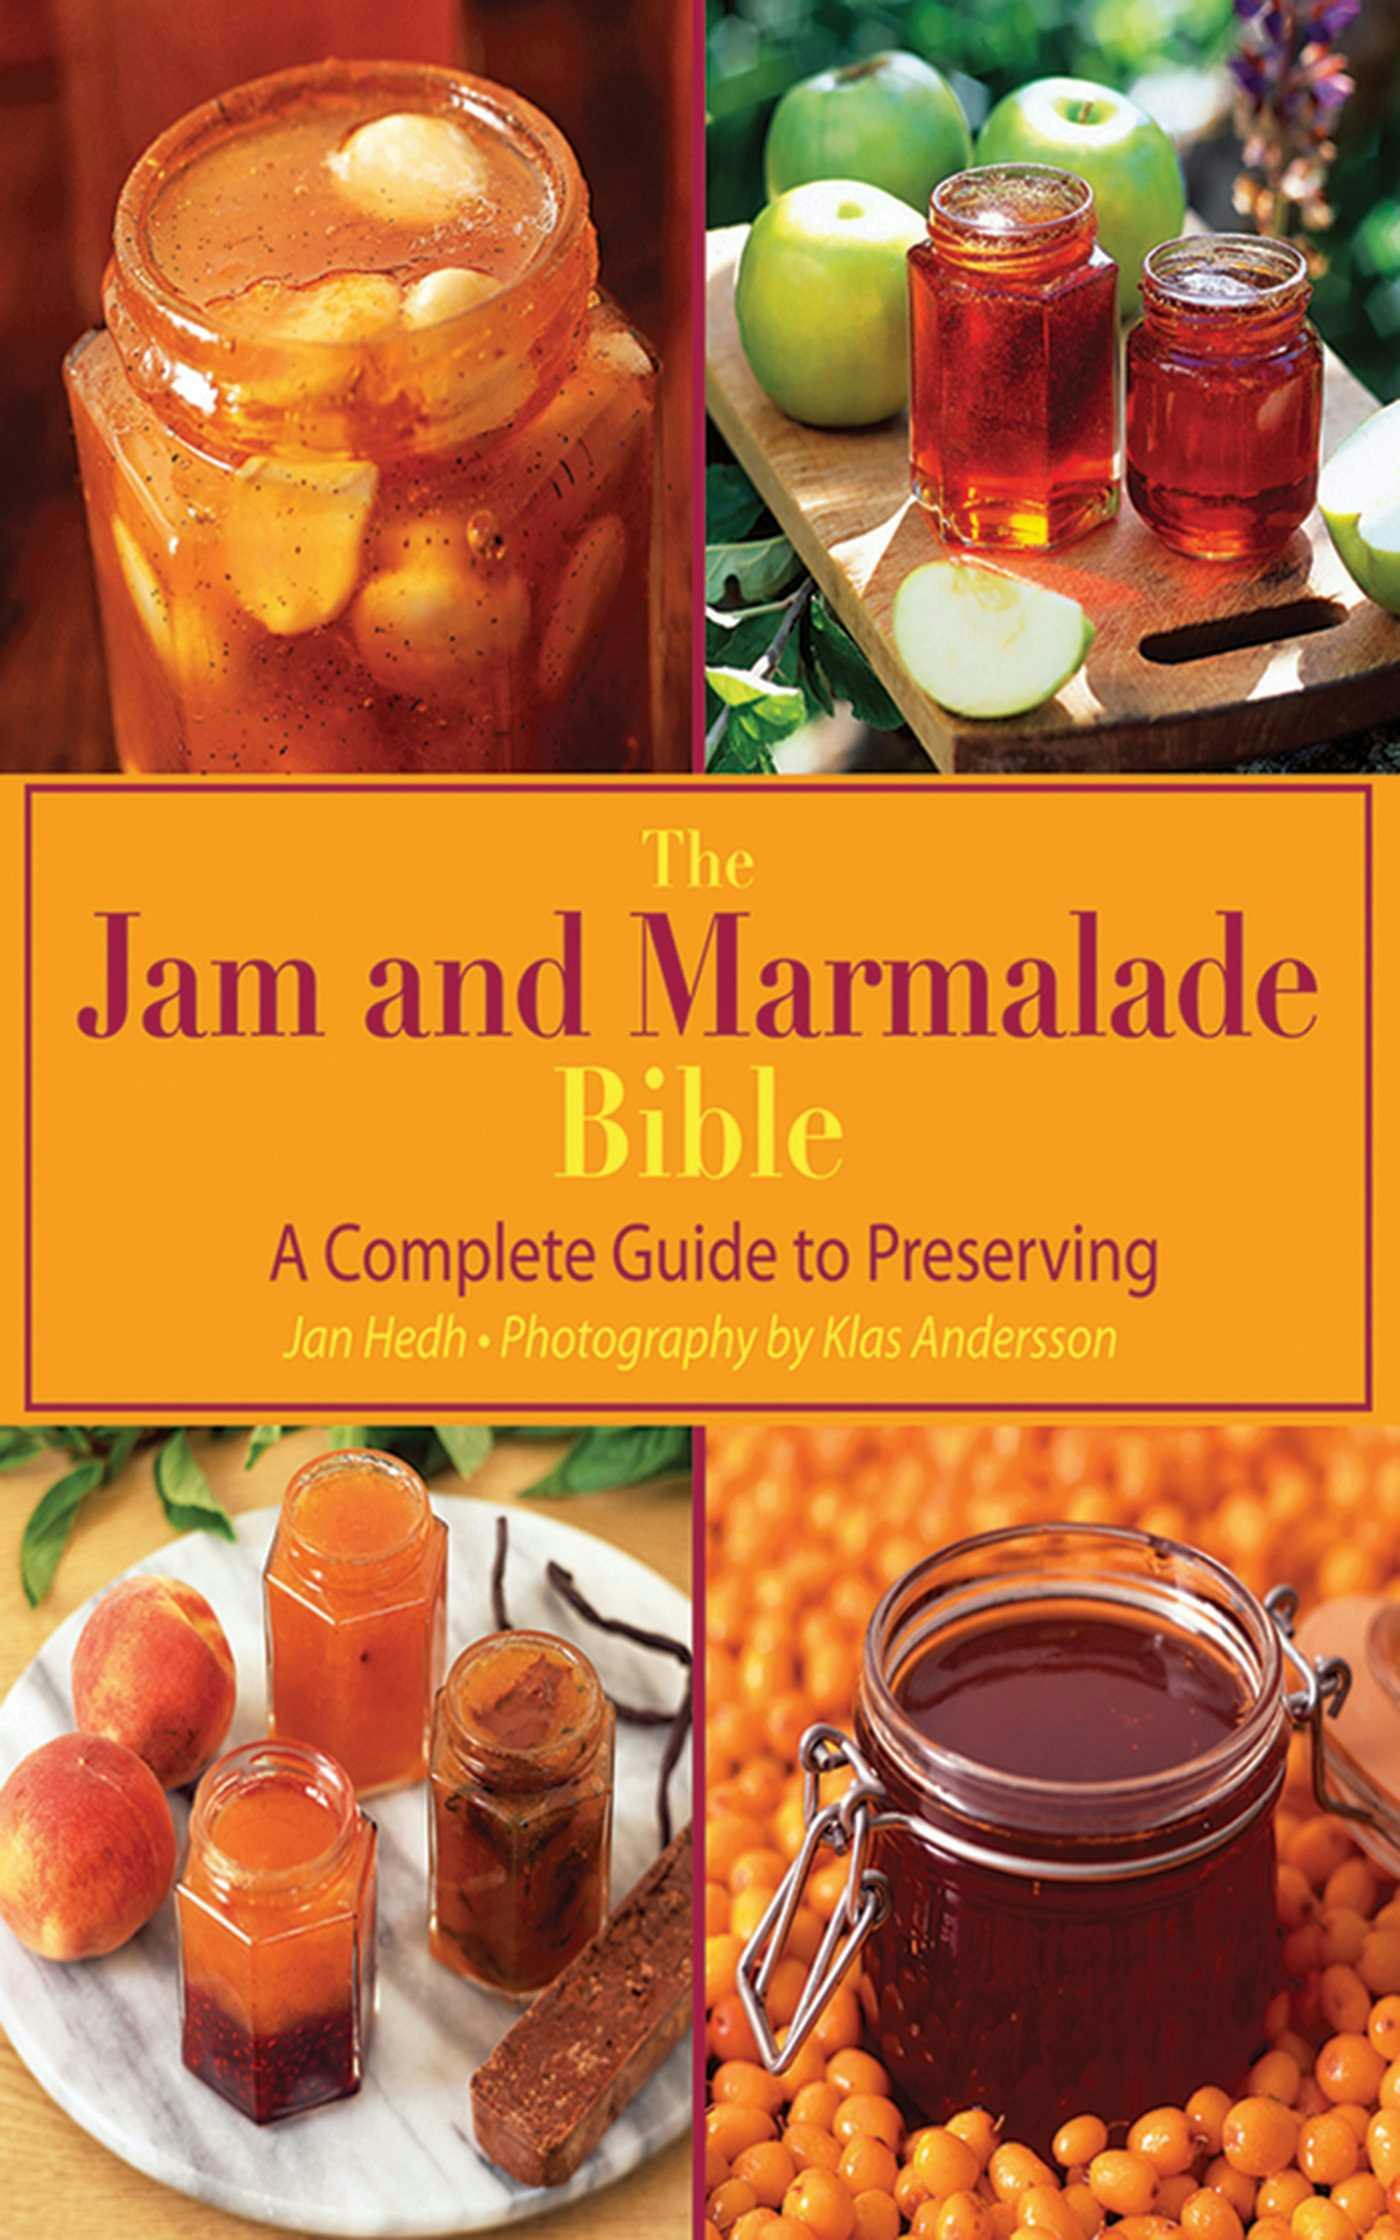 The Jam and Marmalade Bible: A Complete Guide to Preserving - Jan Hedh